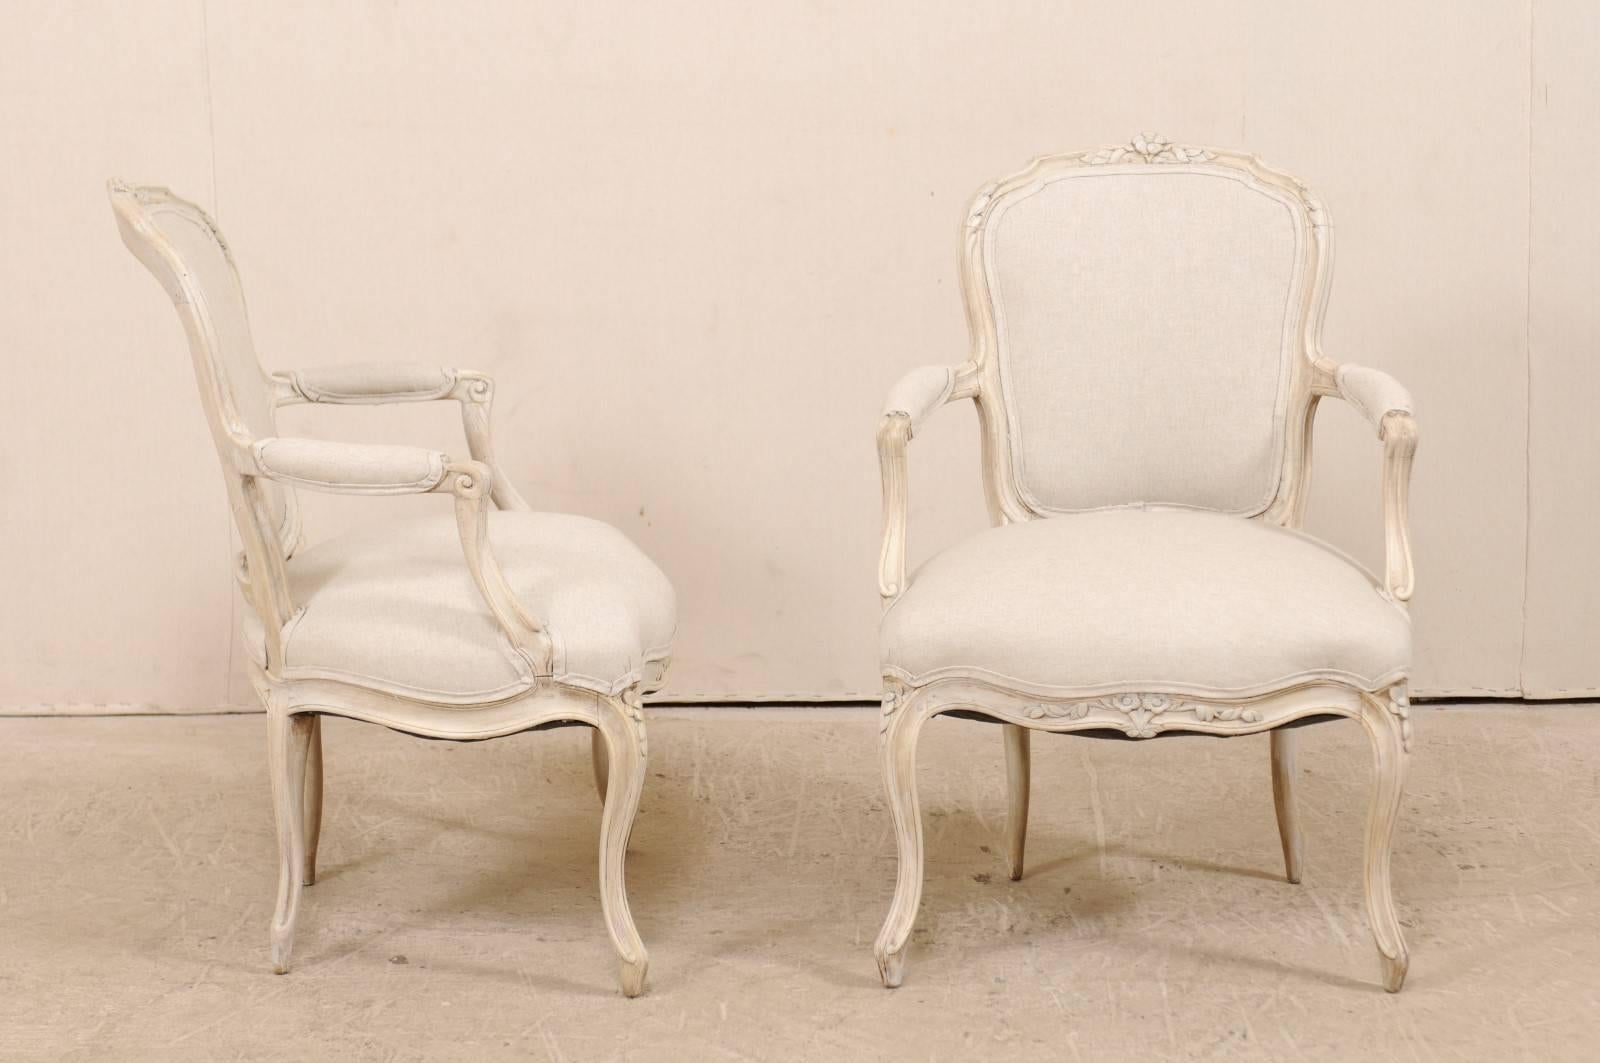 Upholstery Pair of Swedish Louis XVI Style Armchairs from the Mid-20th Century